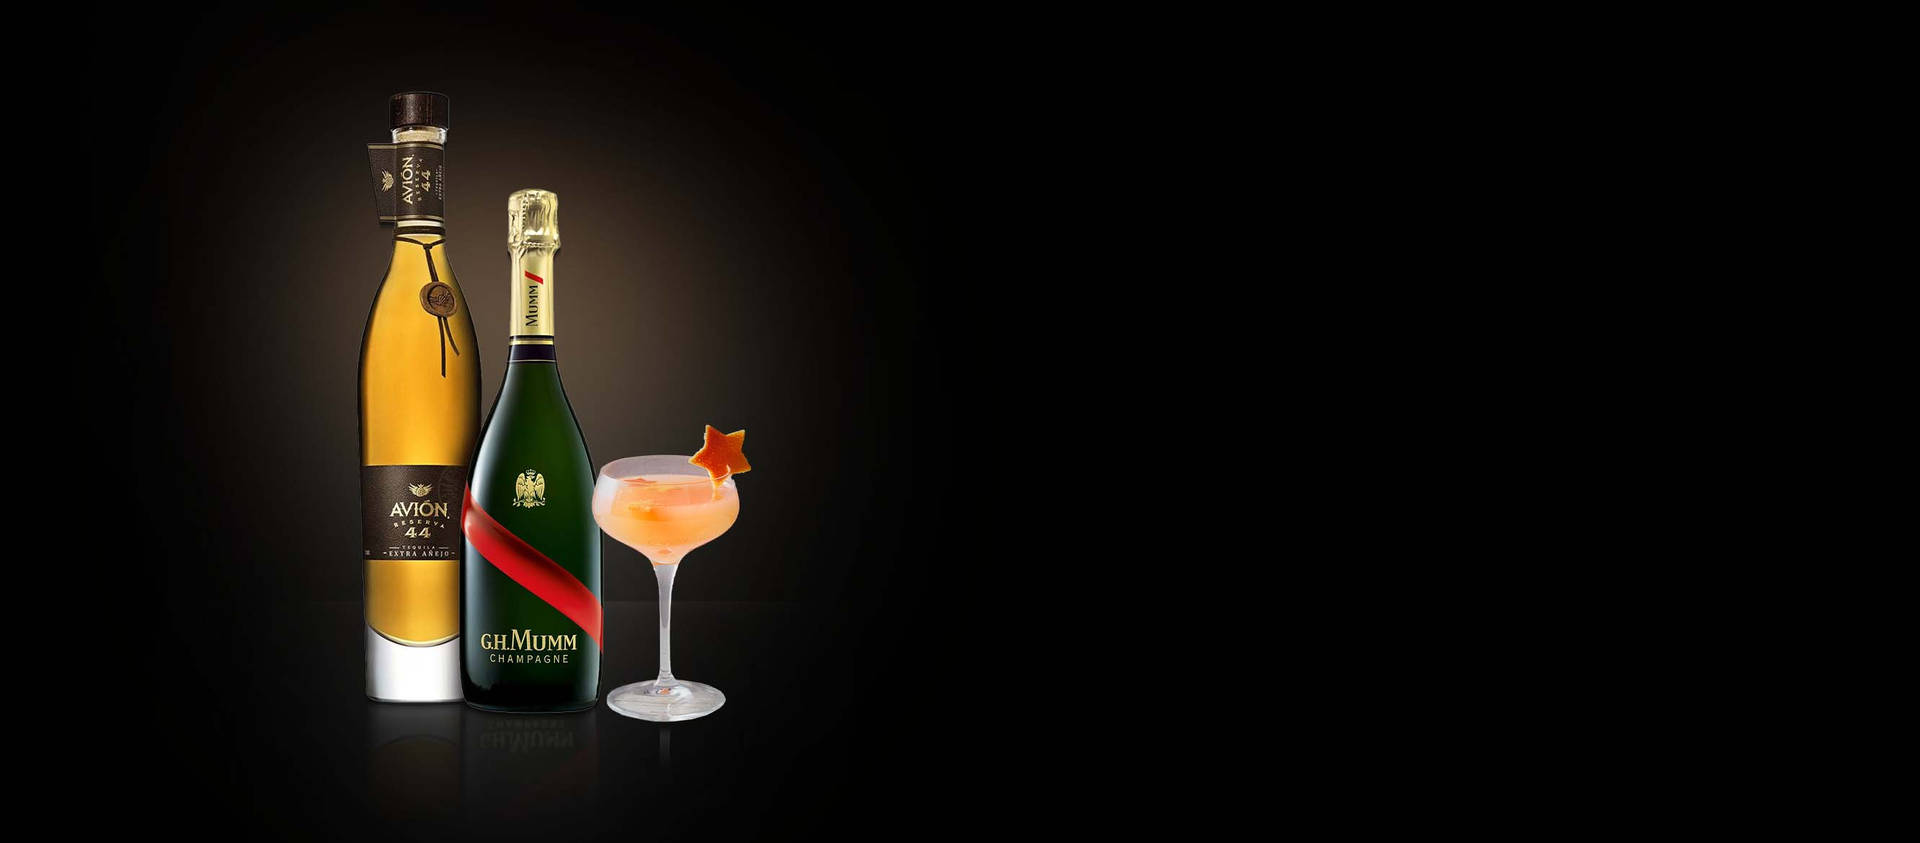 "Avion Tequila and G.H. Mumm Champagne: An Unbeatable Duo for Celebratory Drinks" Wallpaper